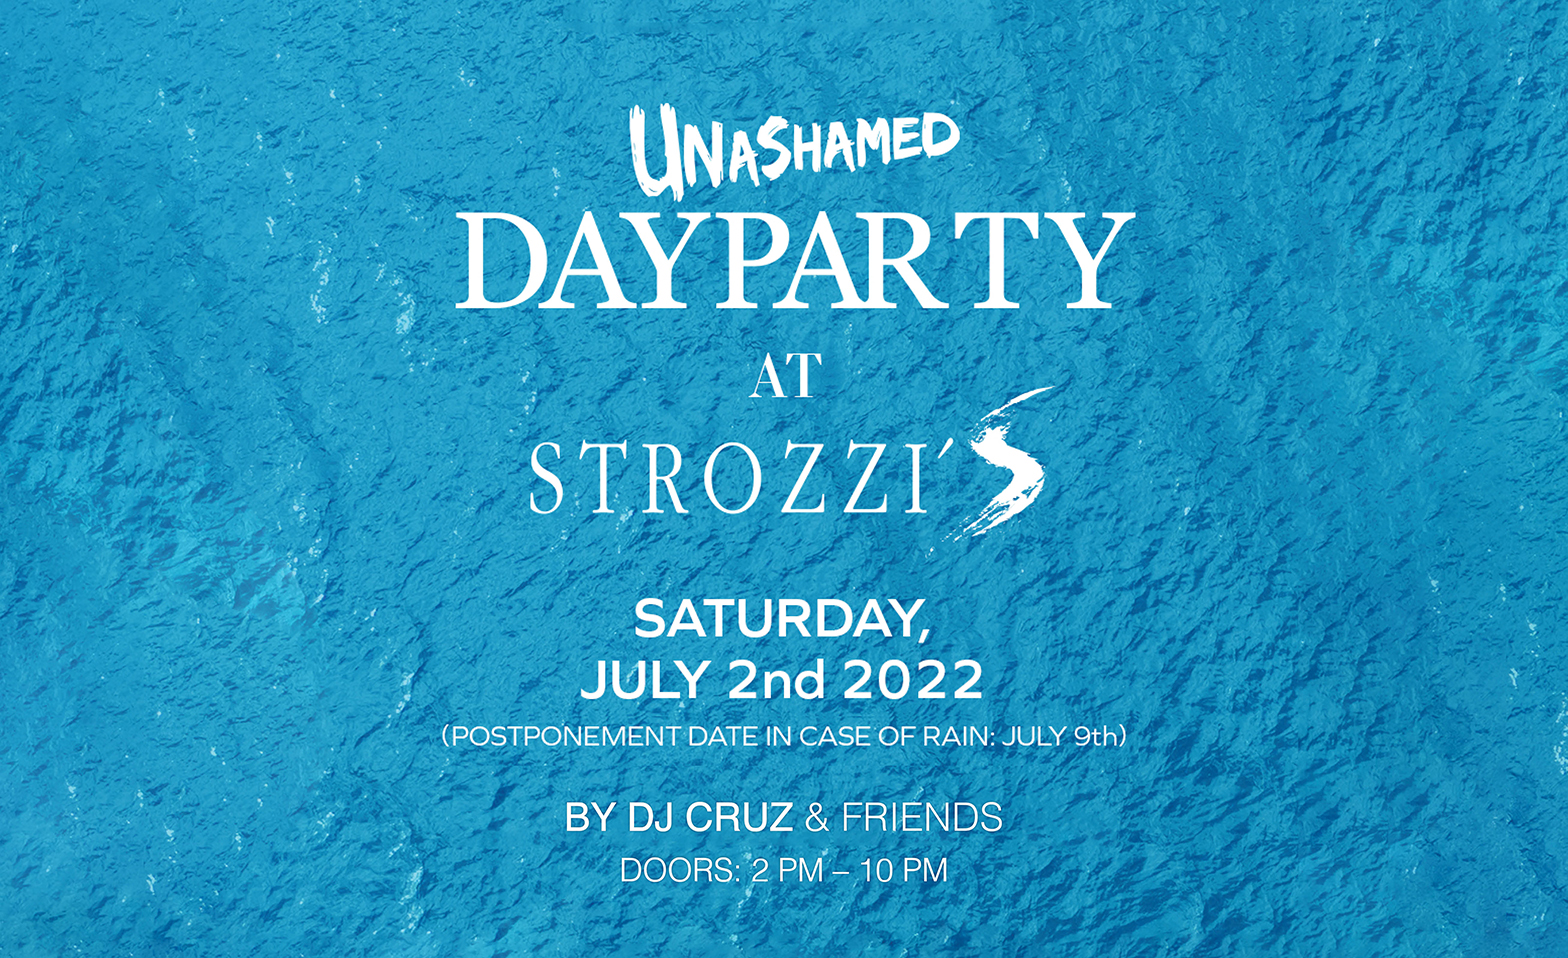 Event-Image for 'Unashamed Boat-Dayparty at Strozzi's'